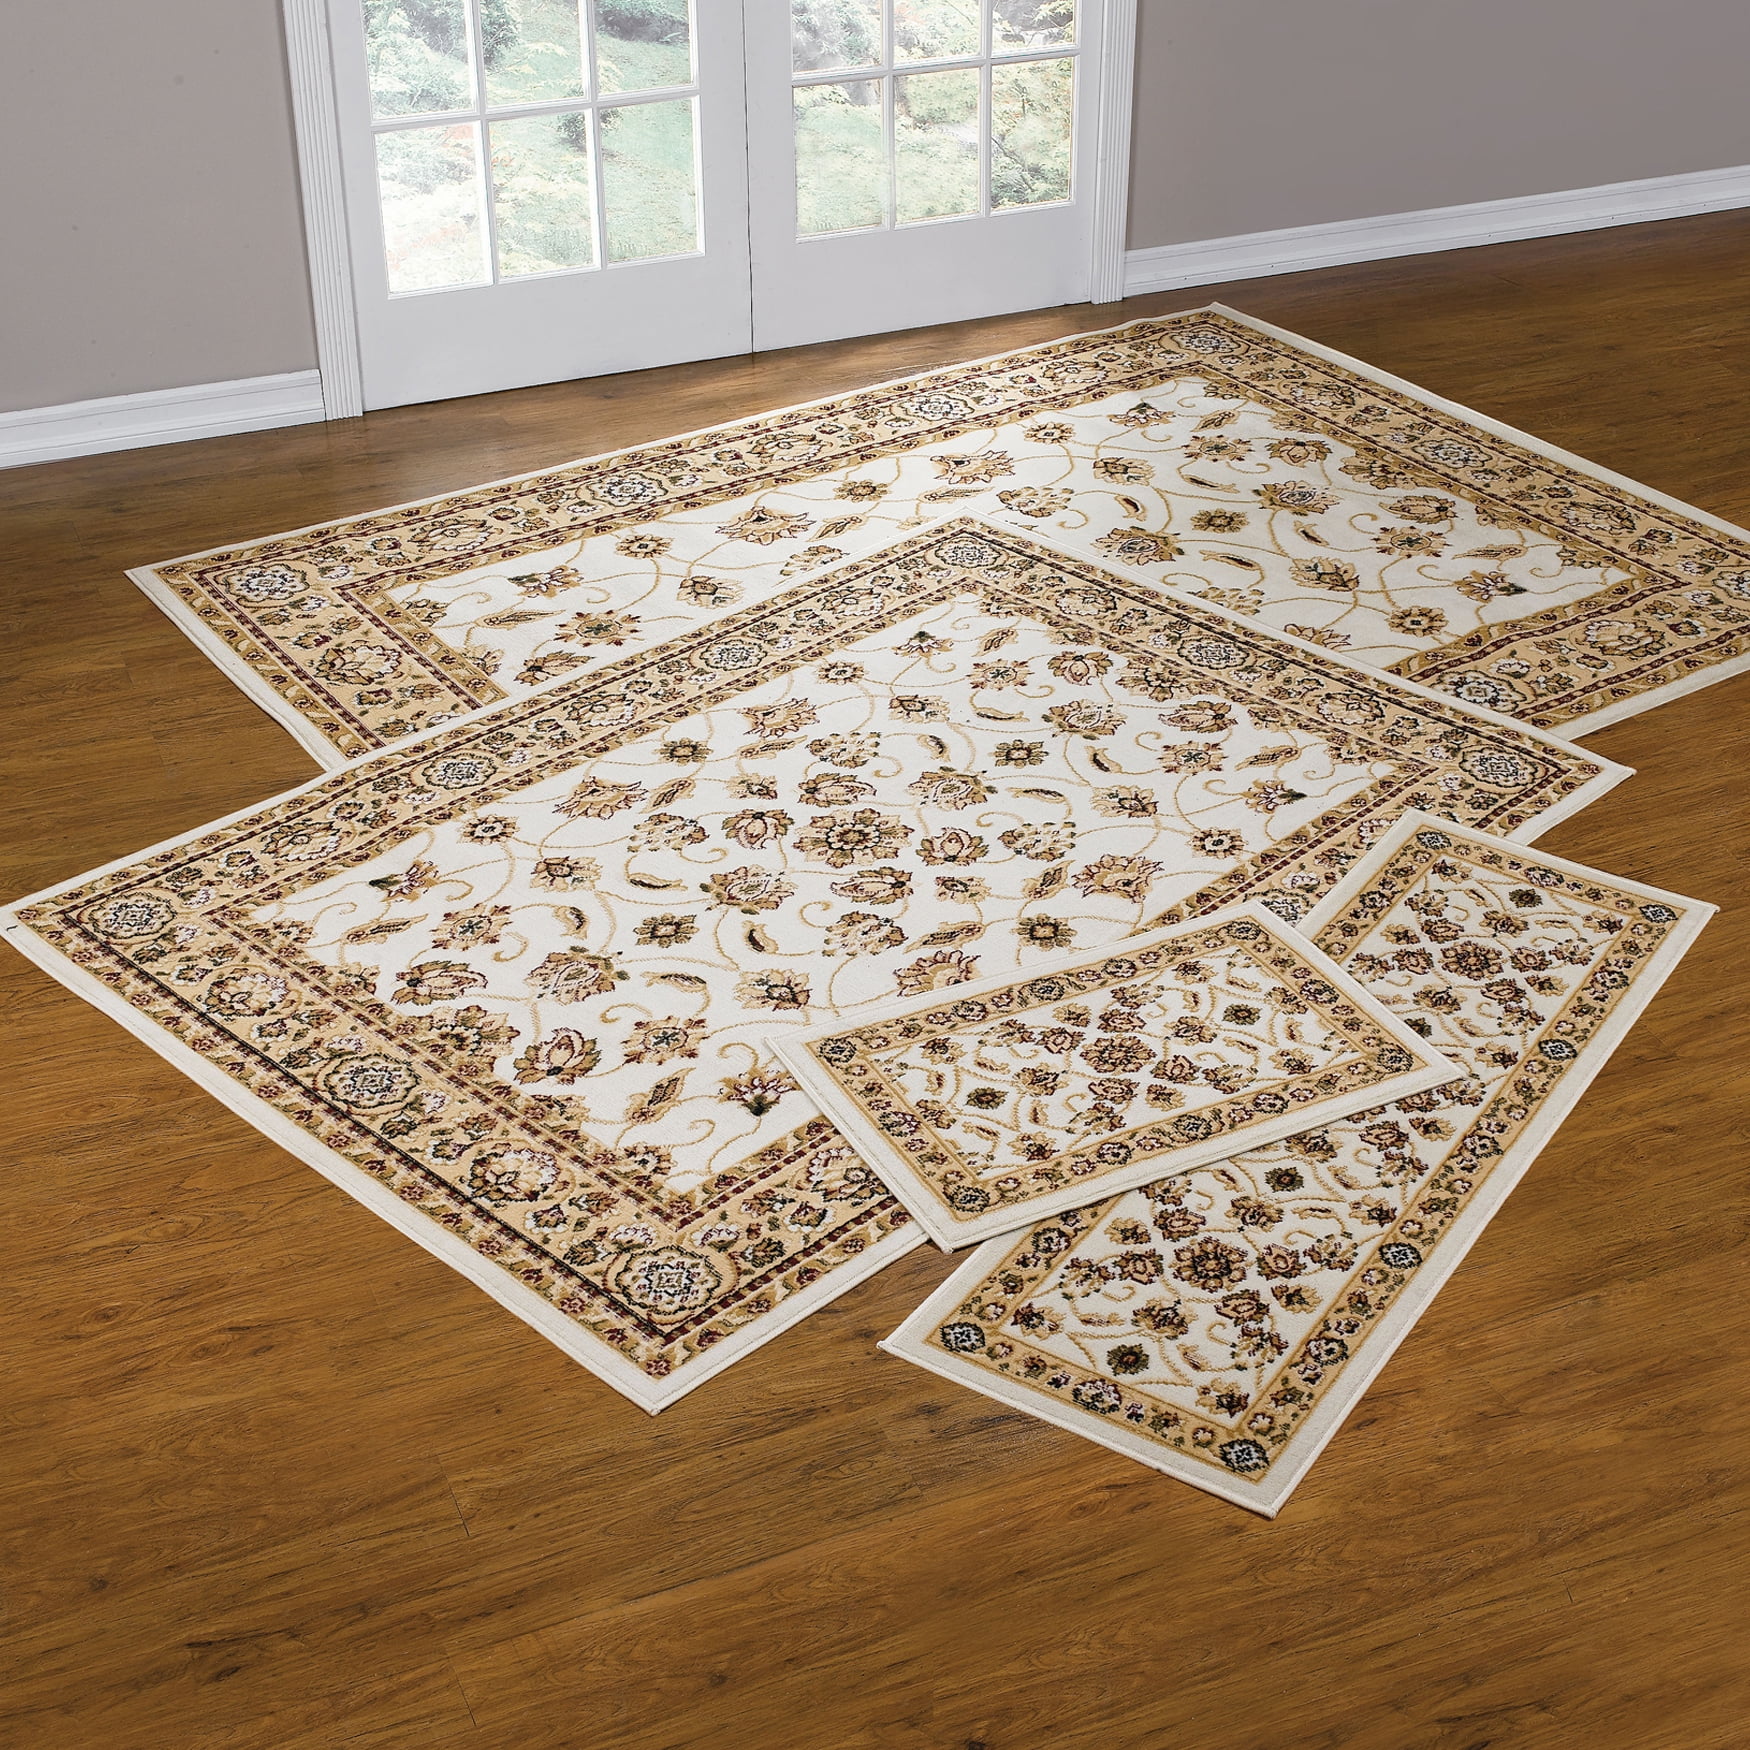 BrylaneHome Floral Vine 4 Piece Rug Set With Runner , Ivory White ...